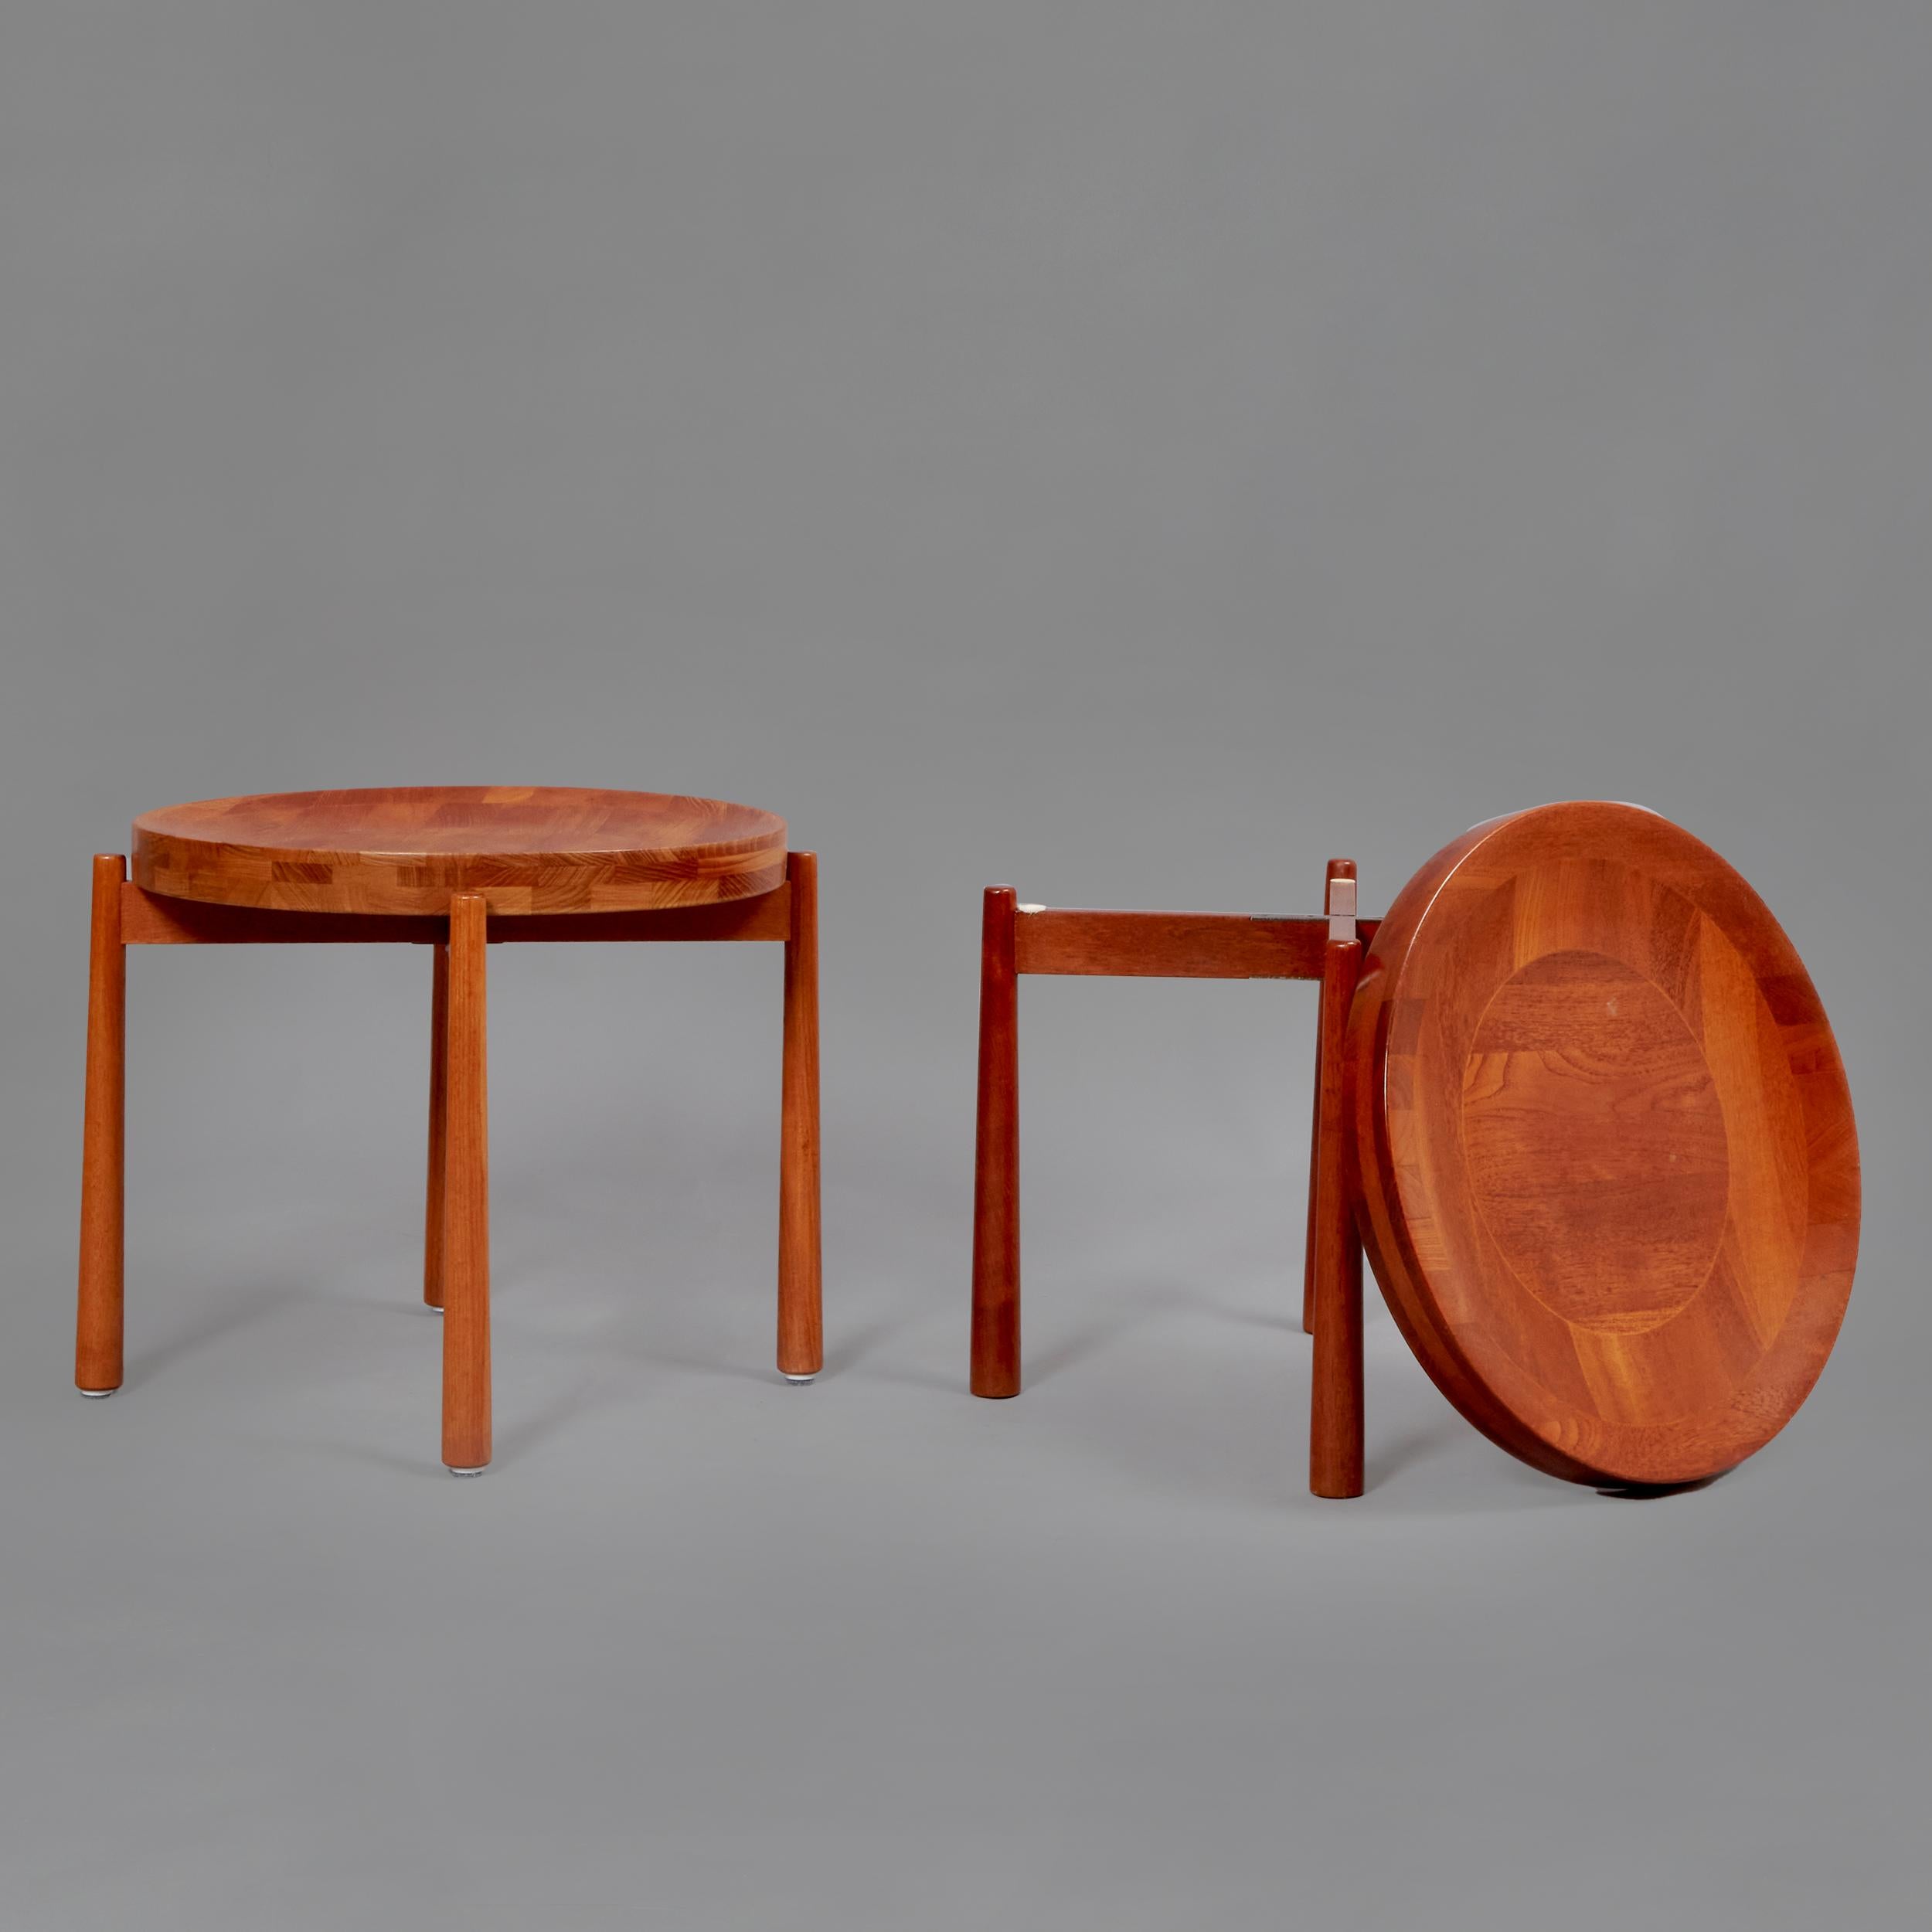 Danish Mid-century modern Jens Quistgaard Teak Wood Side Table and Tray For Sale